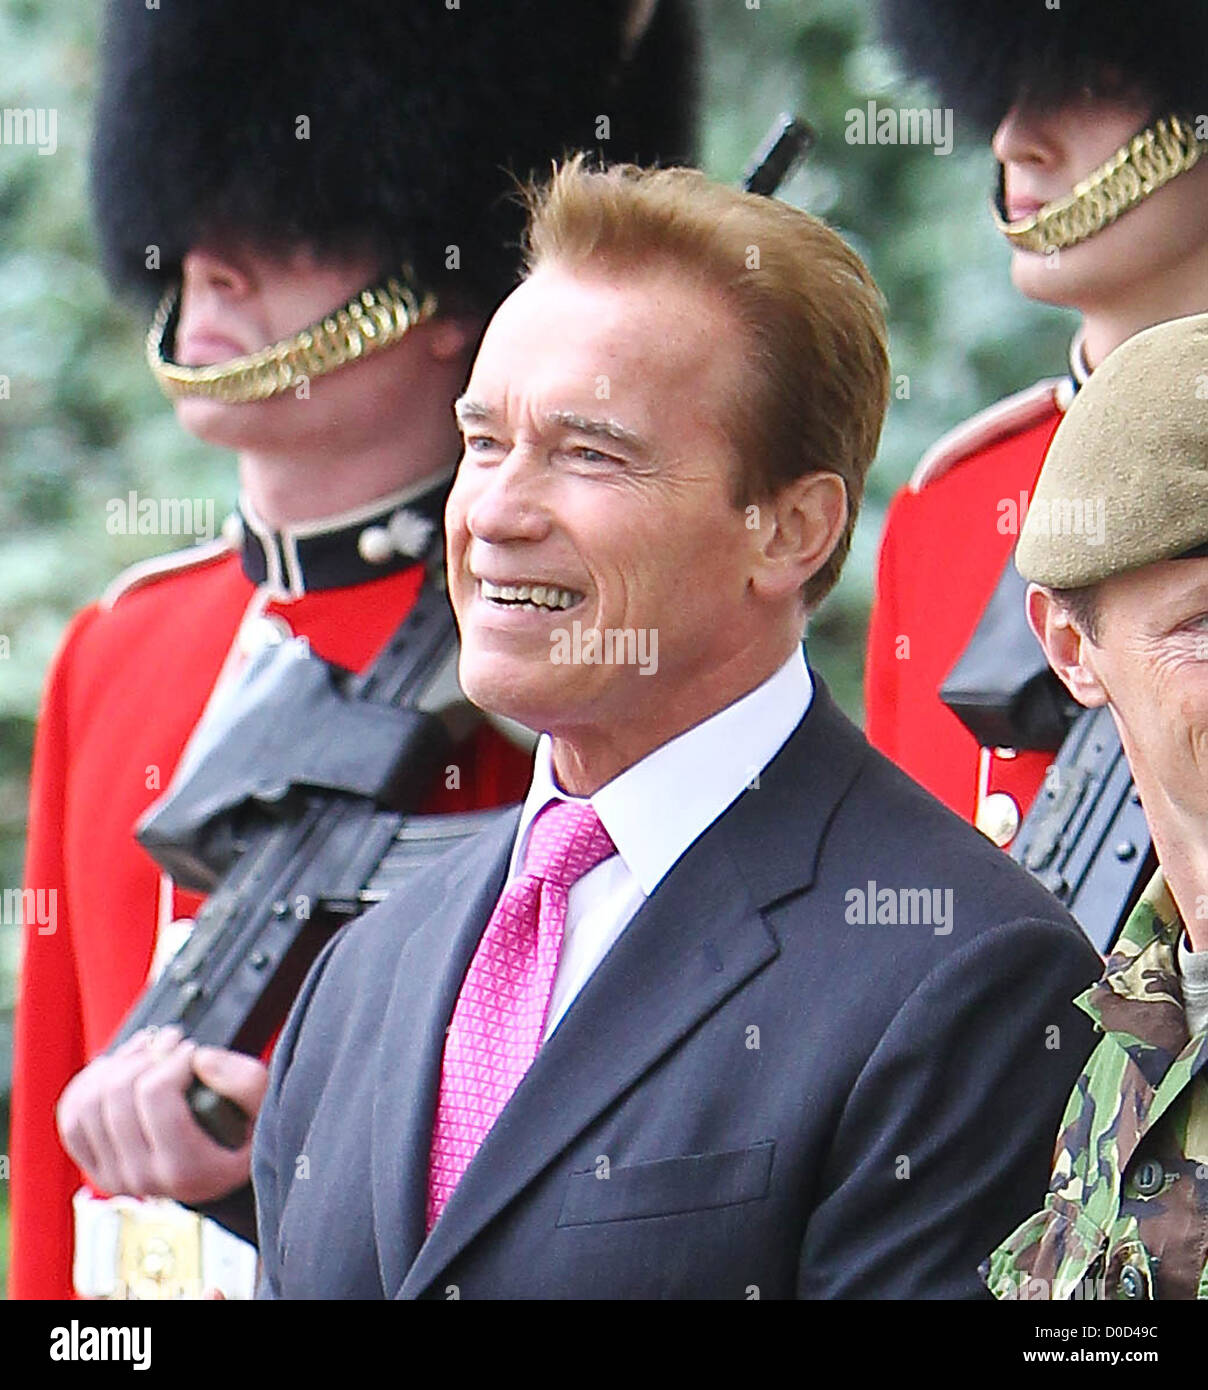 Arnold Schwarzenegger watches the changing of the guards London, England - 14.10.10 Stock Photo